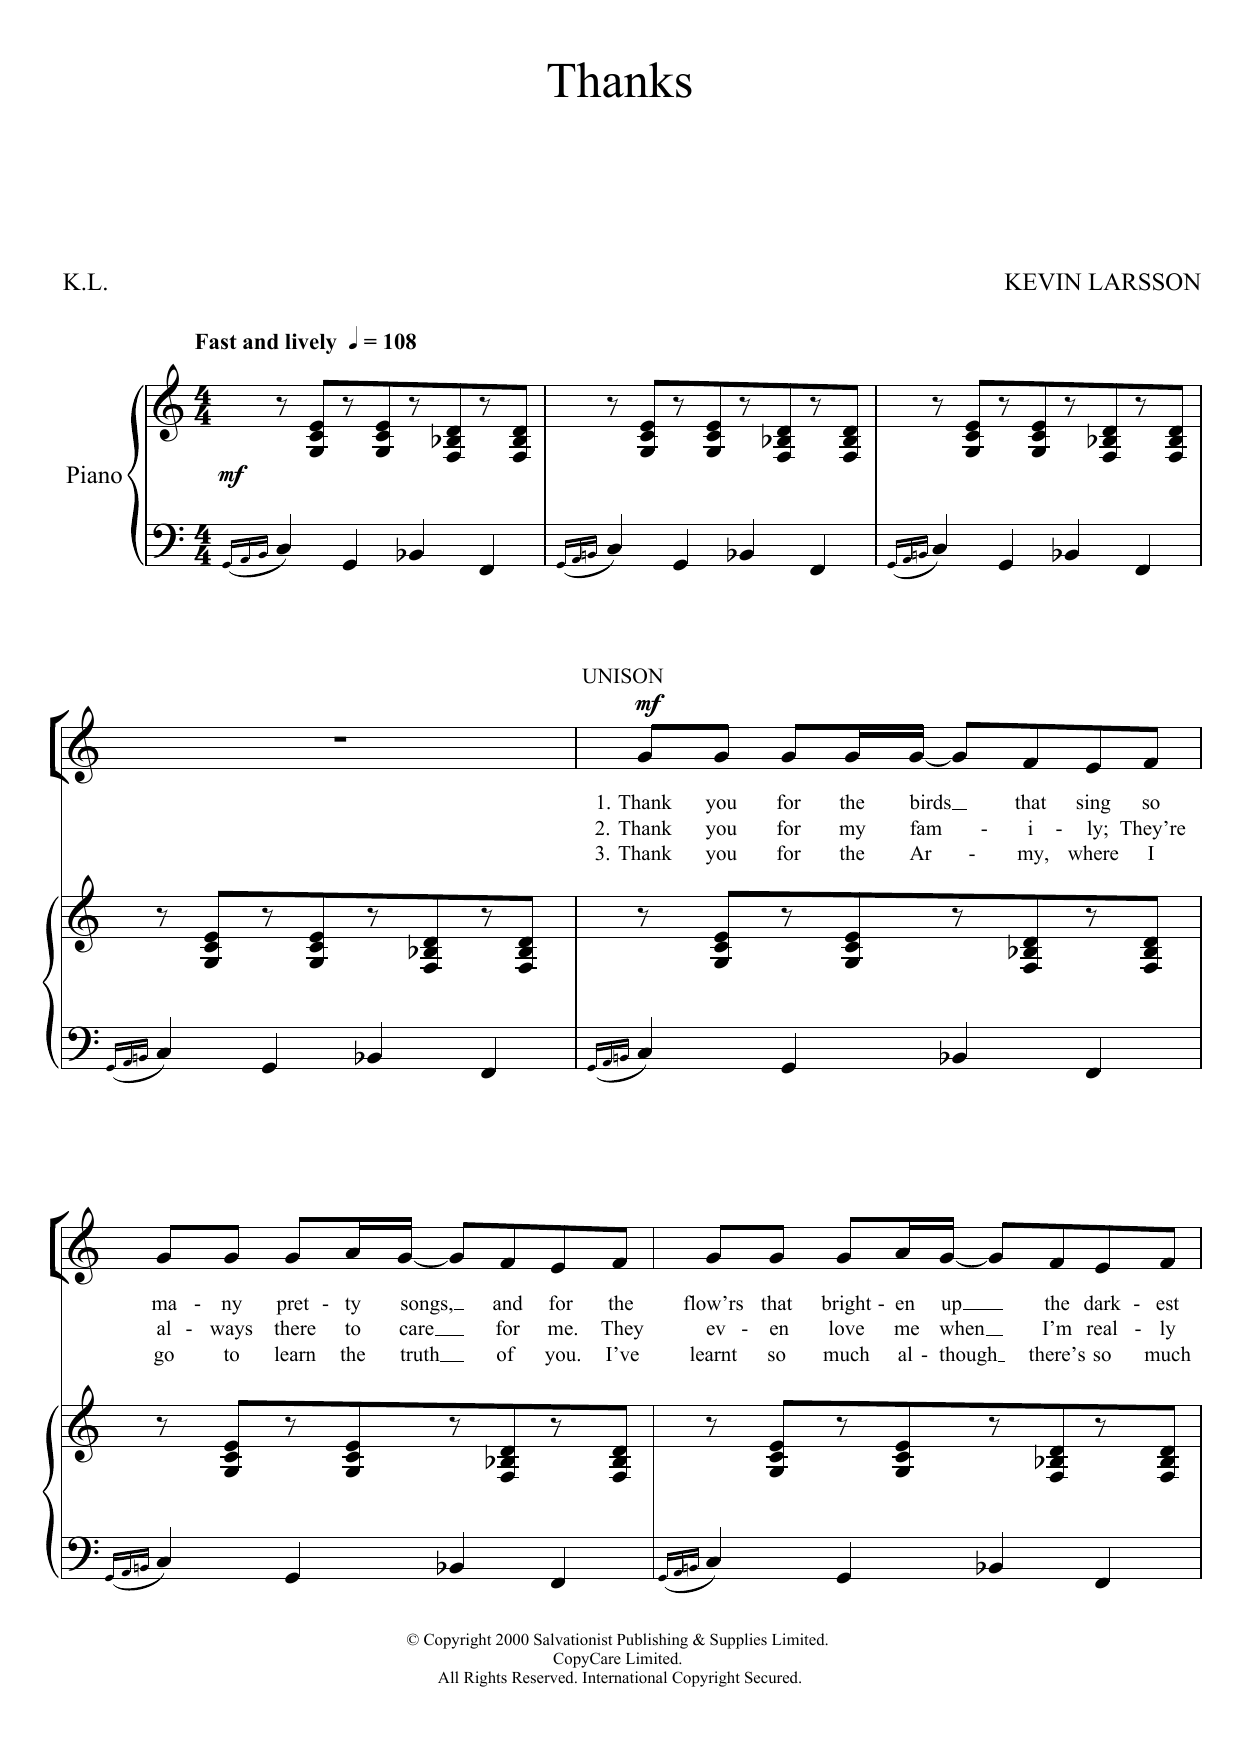 Download The Salvation Army Thanks Sheet Music